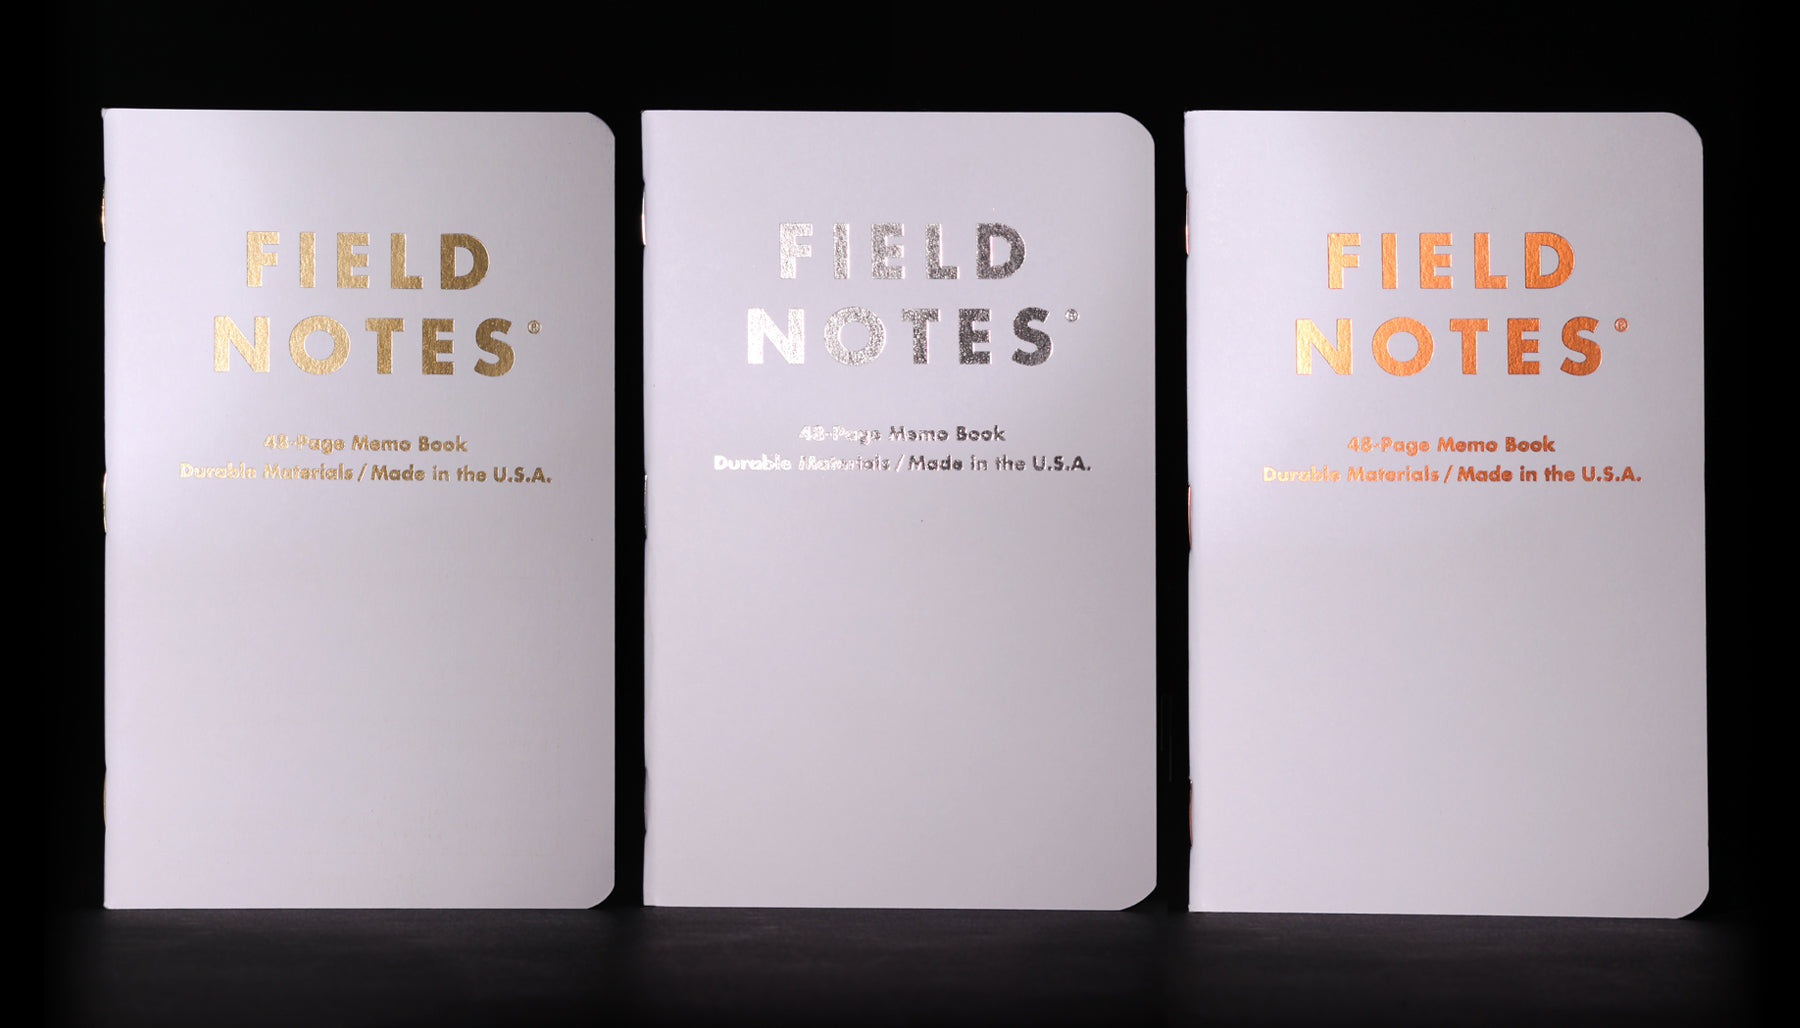 Field Notes Group Eleven Notebook 3 Pack